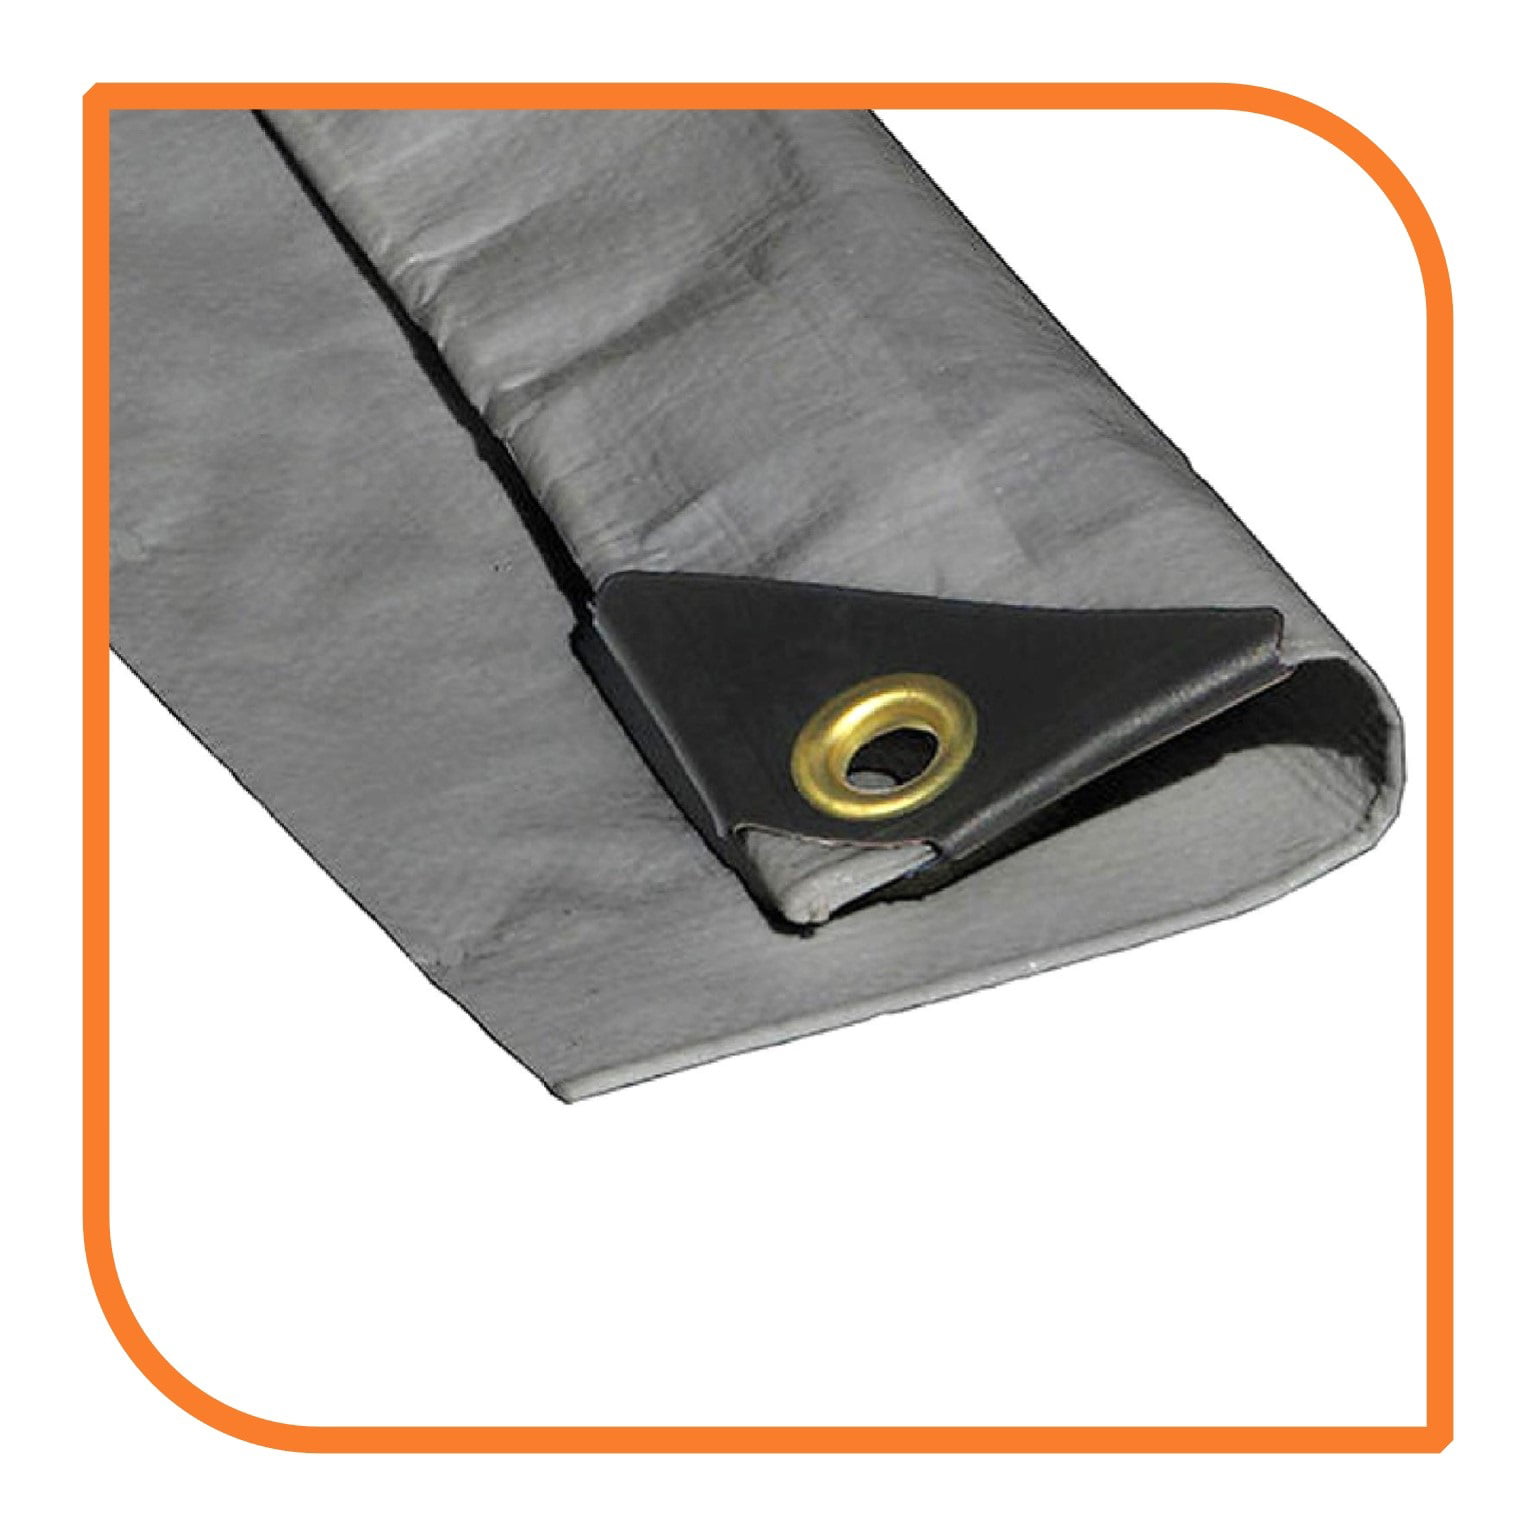 Details about   12' X 30' Super Heavy Duty 16 Mil Brown Poly Tarp Cover Thick Waterproof 